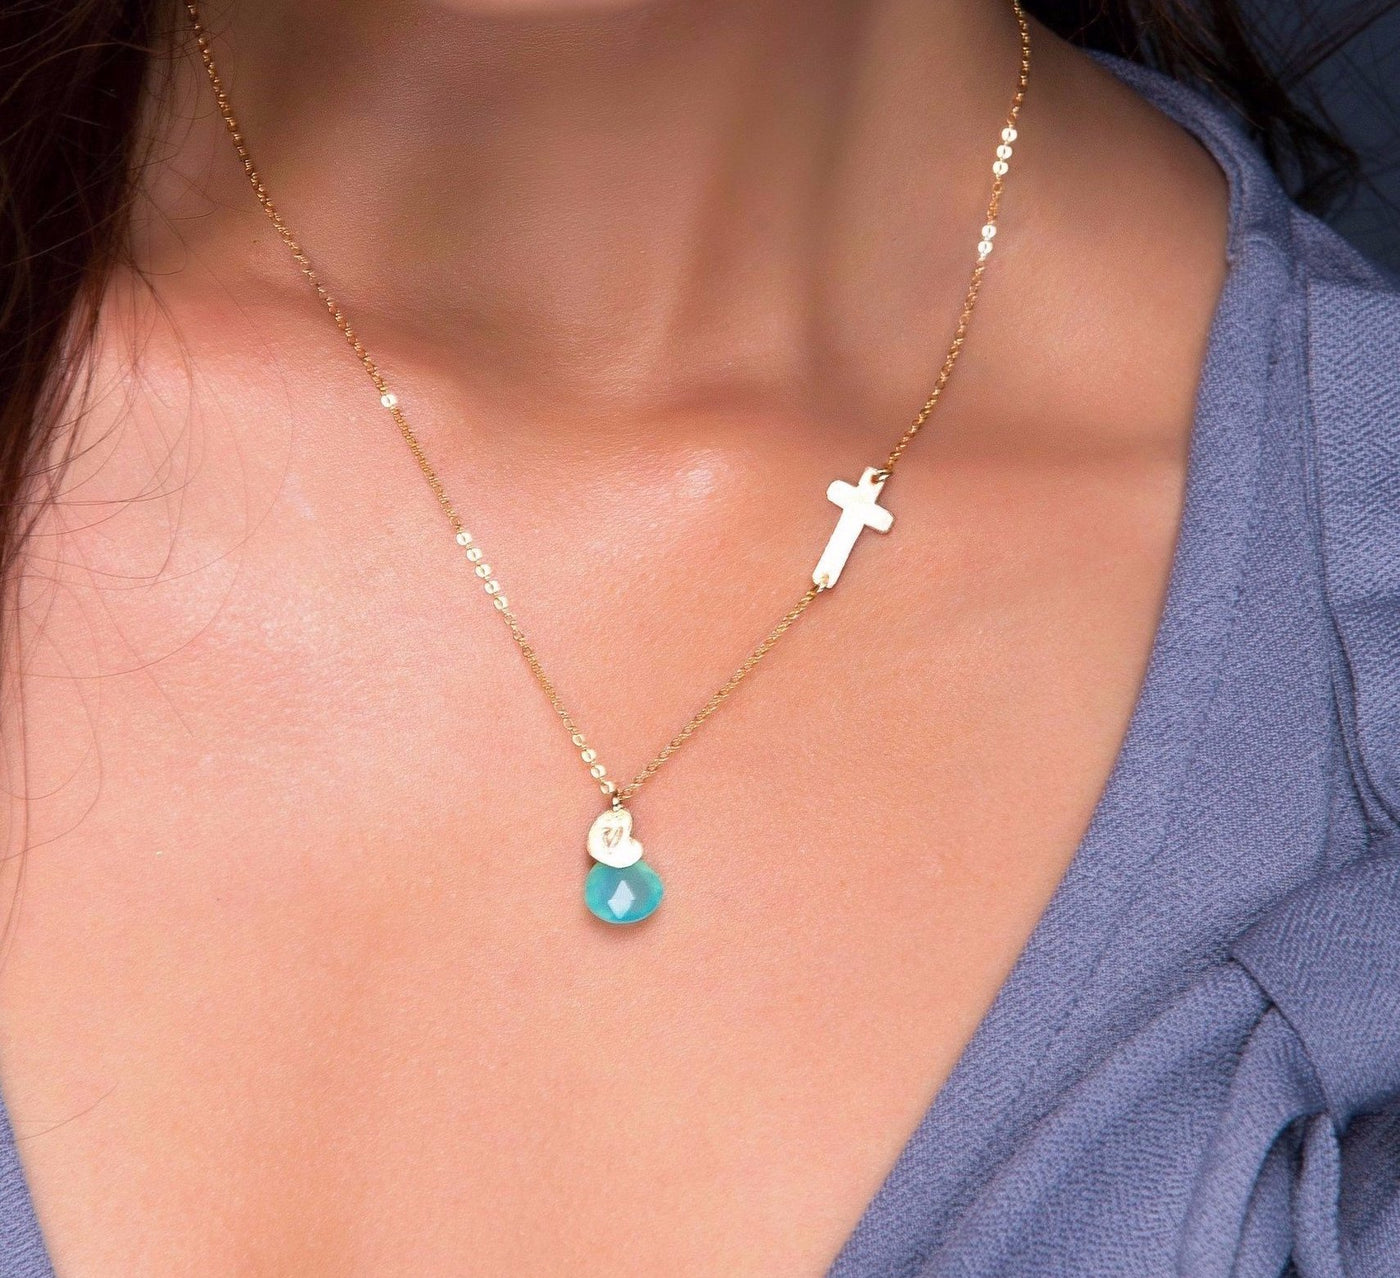 Personalized Small Sideways Cross and Birthstone Necklace